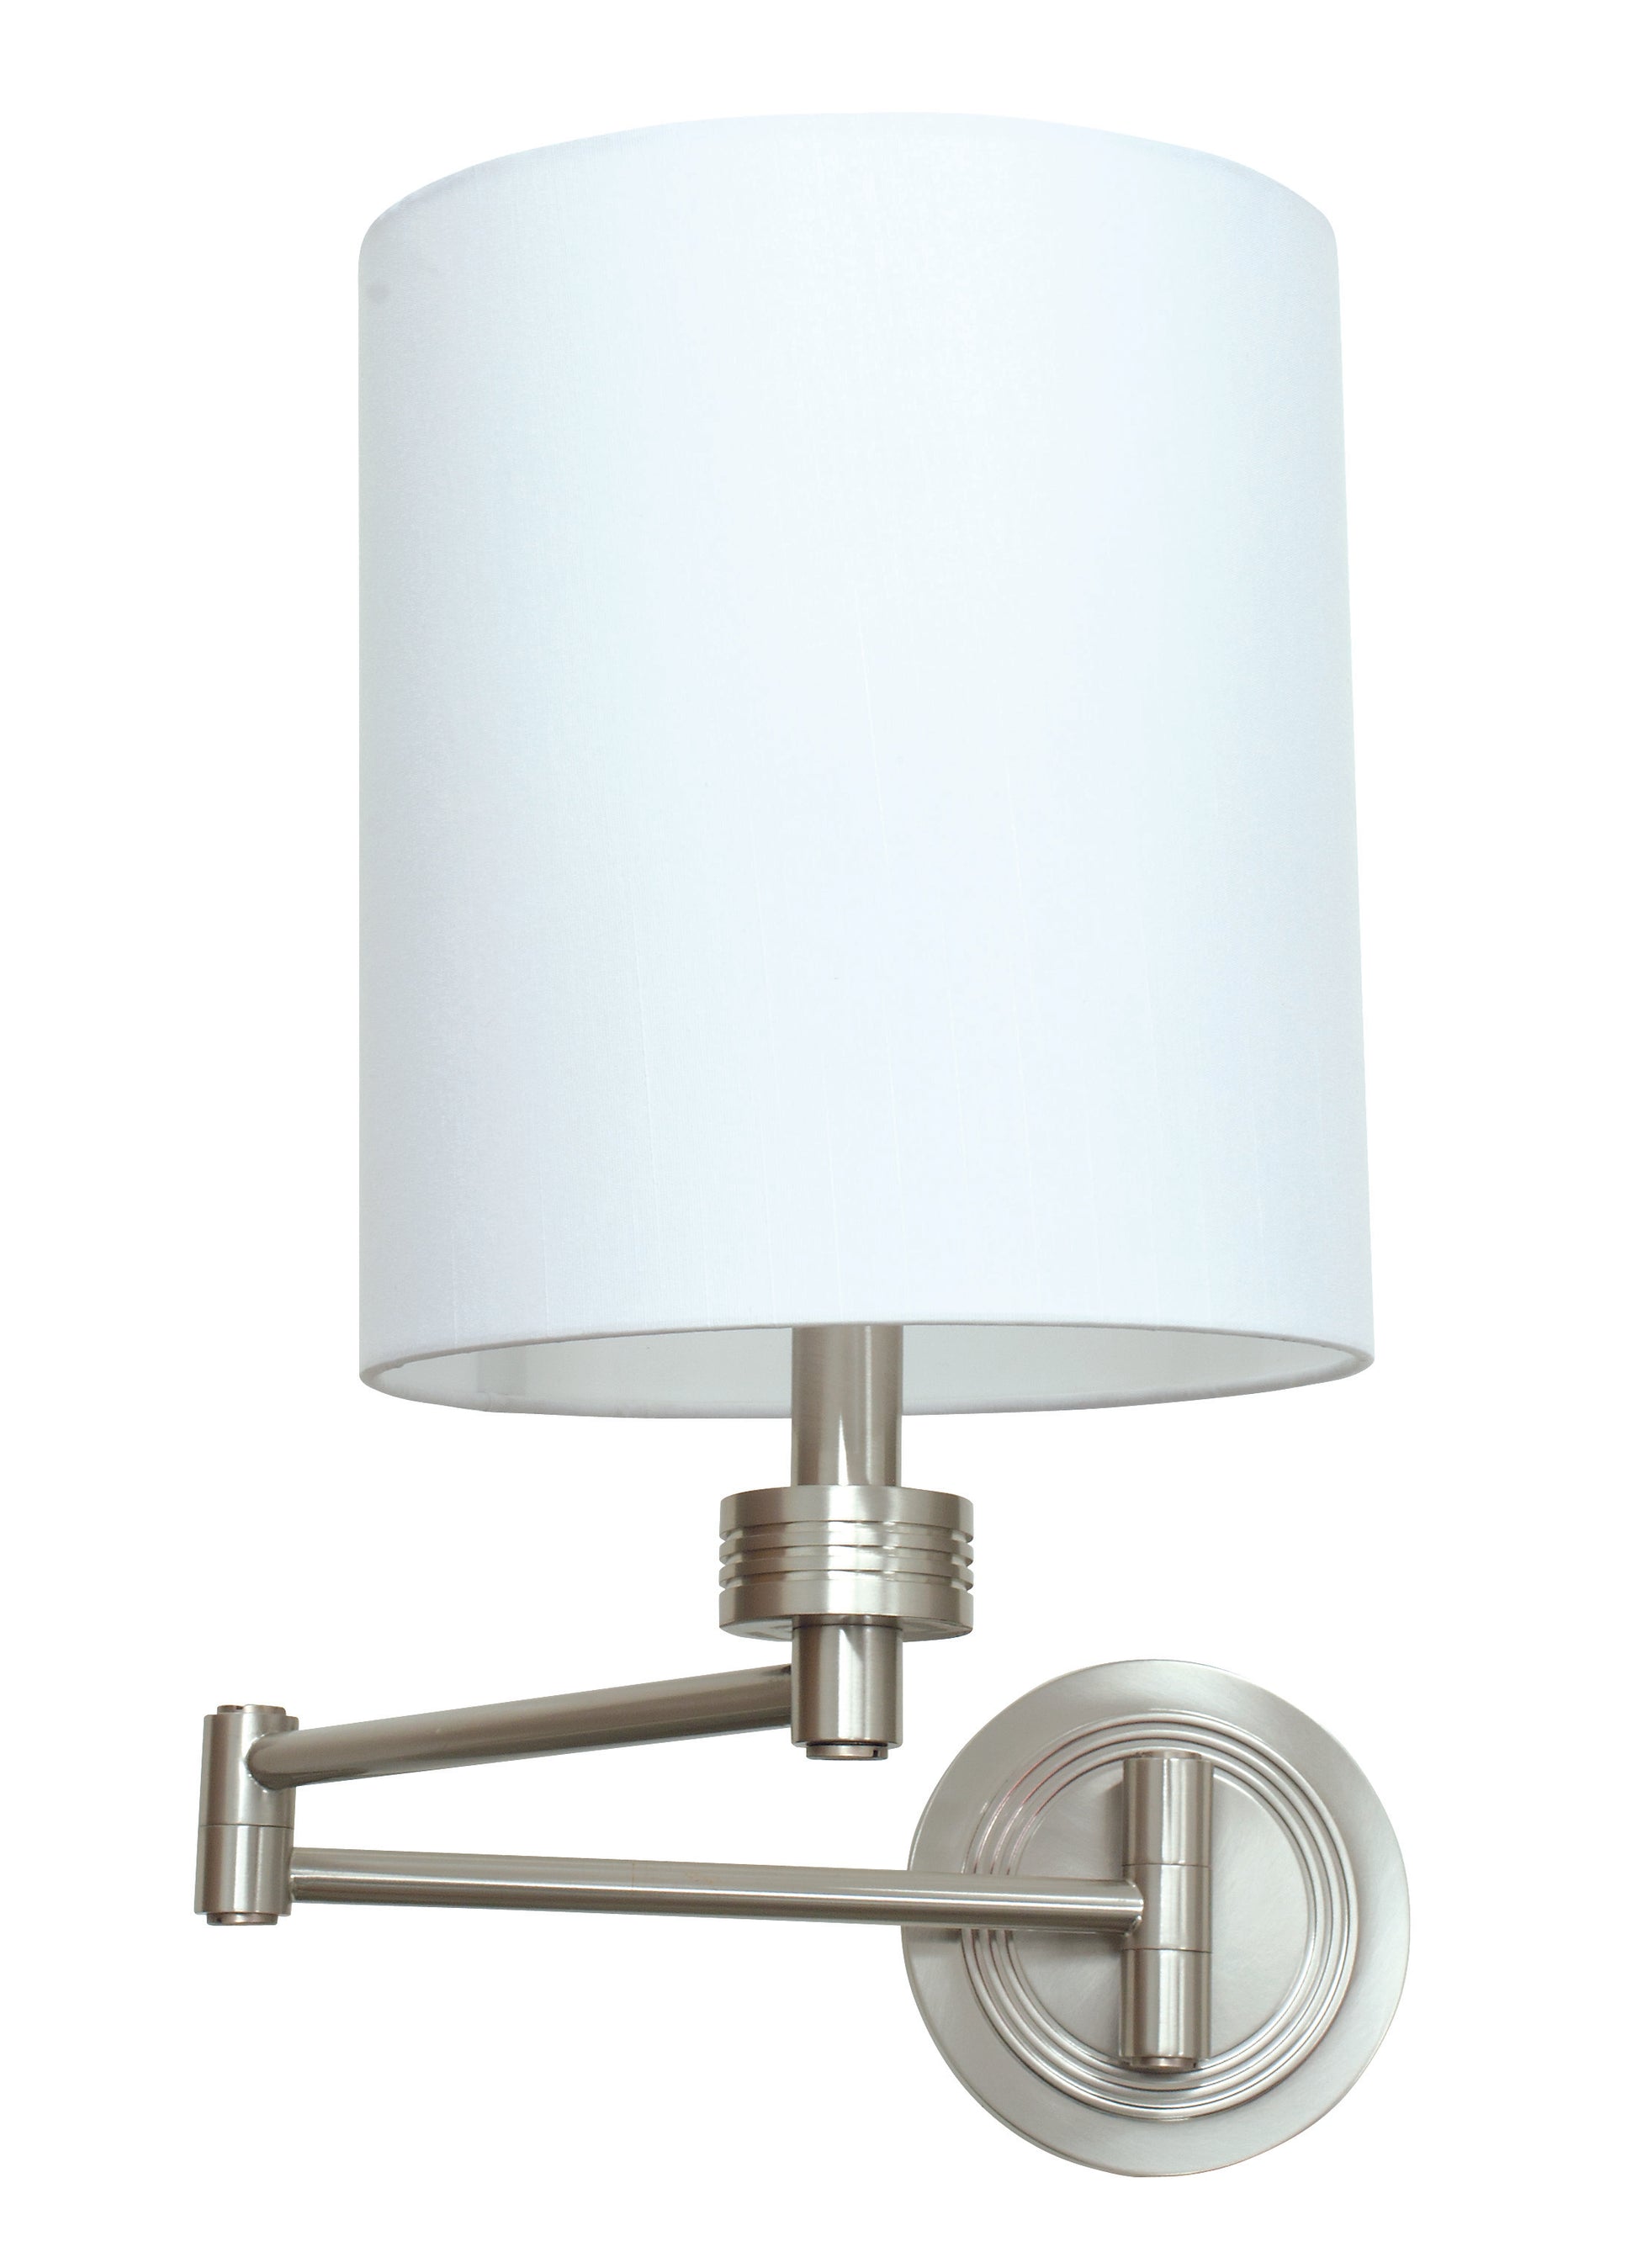 House of Troy Wall Swing Arm Lamp Satin Nickel WS775-SN